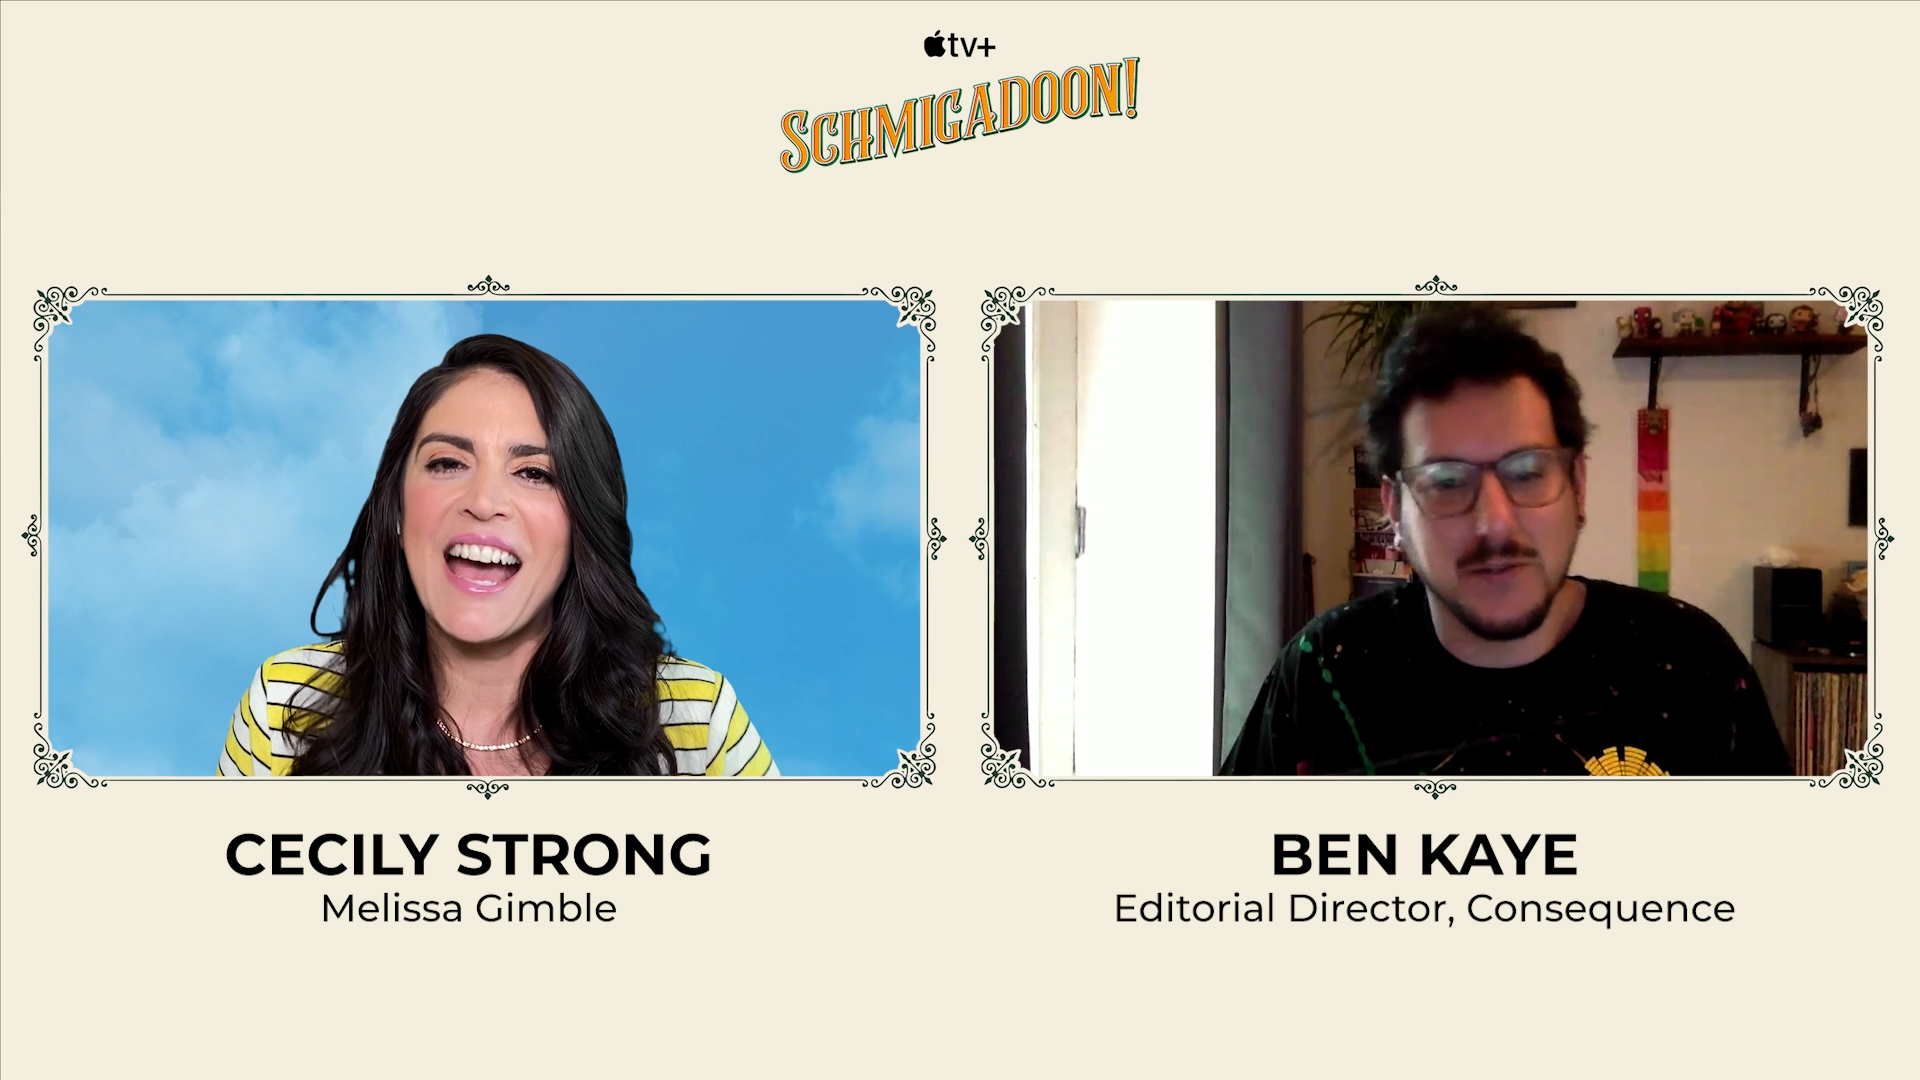 Cecily Strong and Barry Sonnenfeld on the Apple TV+ Musical Series Schmigadoon!